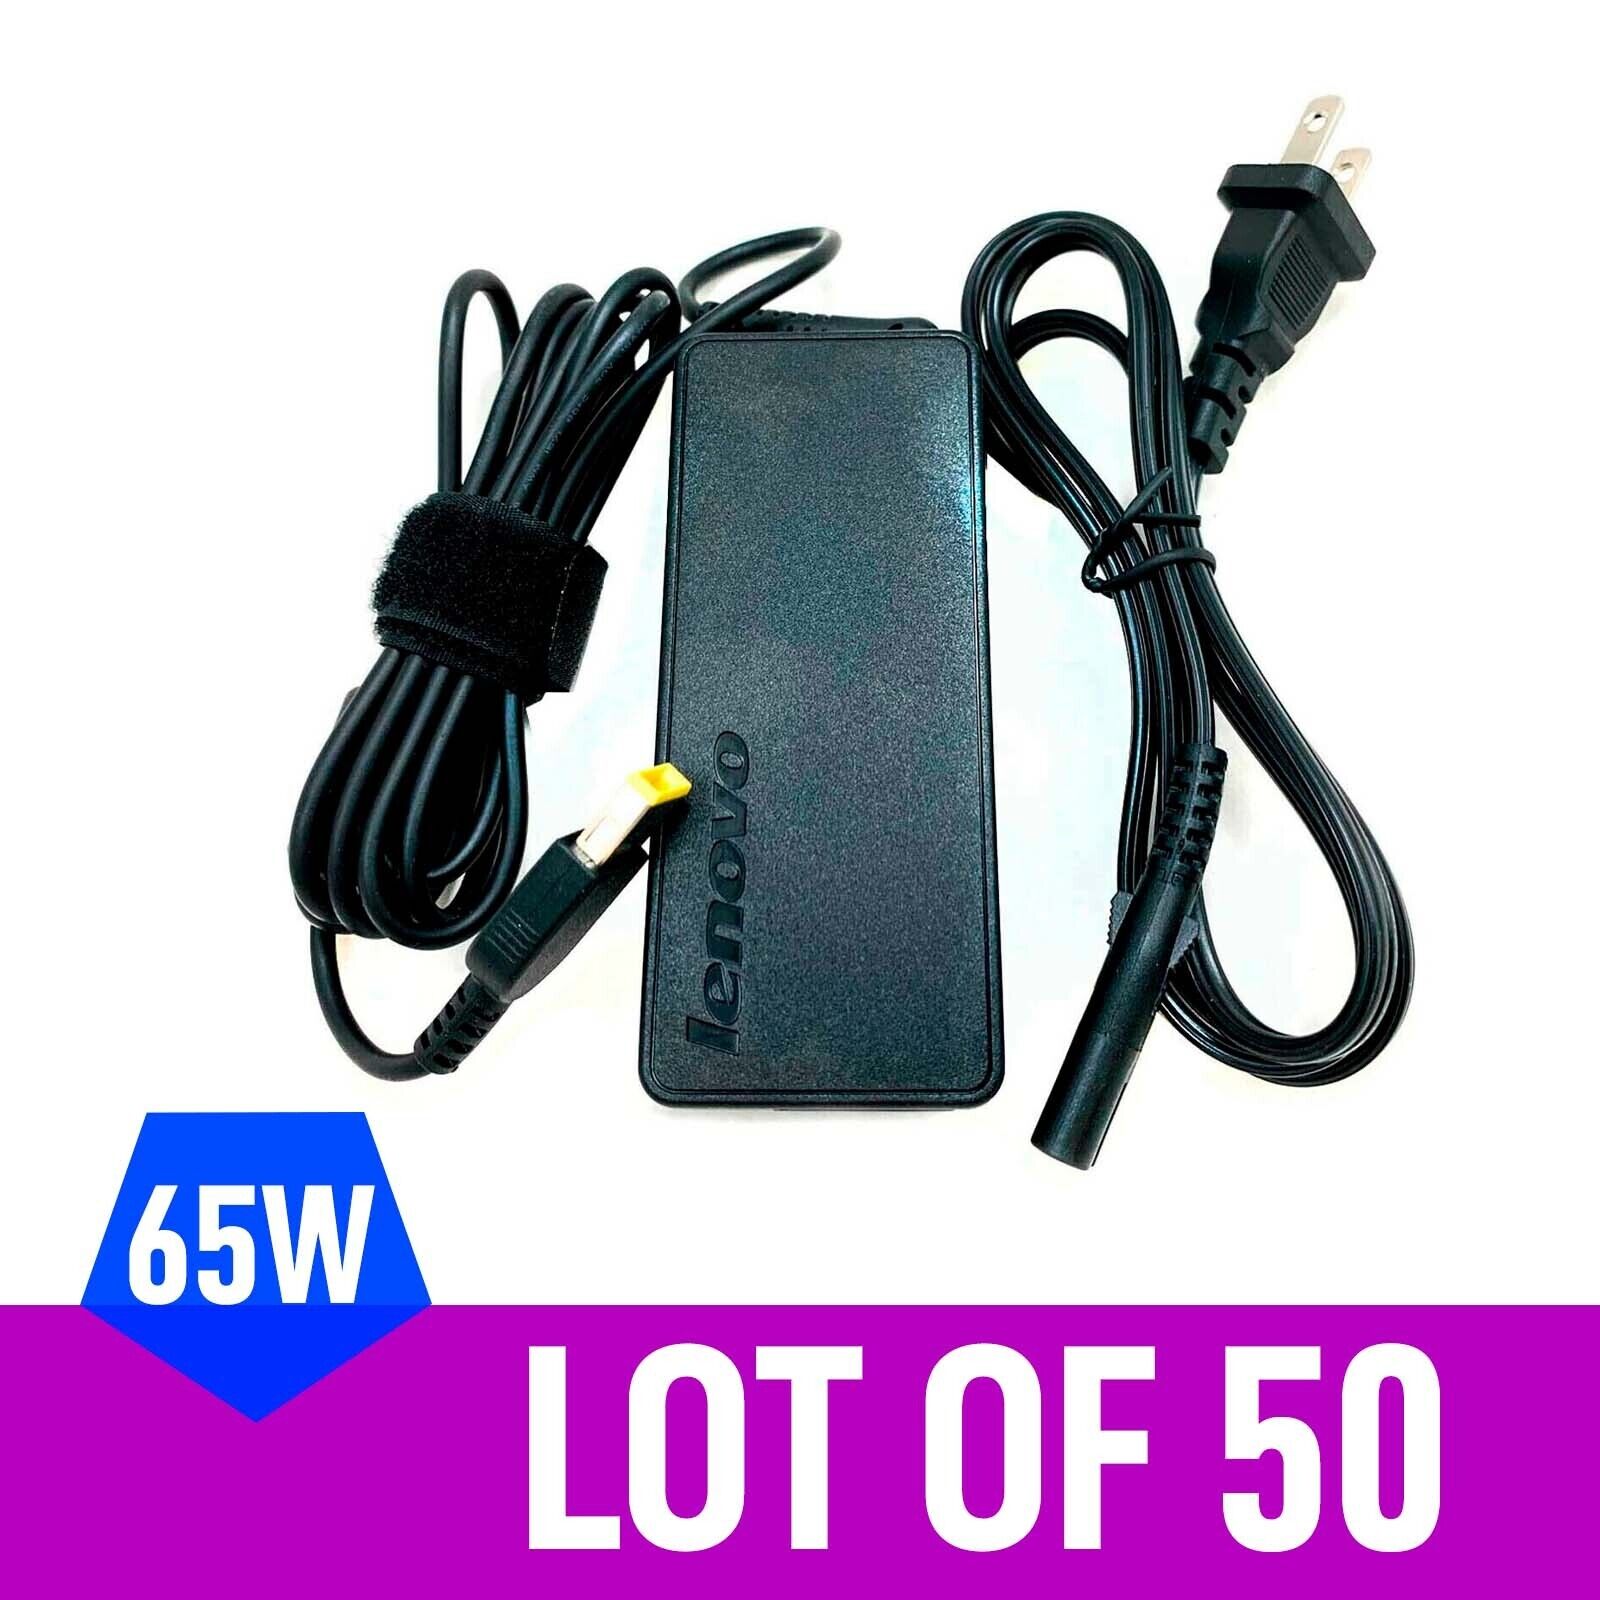 Lot of 50 OEM 65W Lenovo AC Power Adapter Charger 20V 3.25A Square Tip & Cord